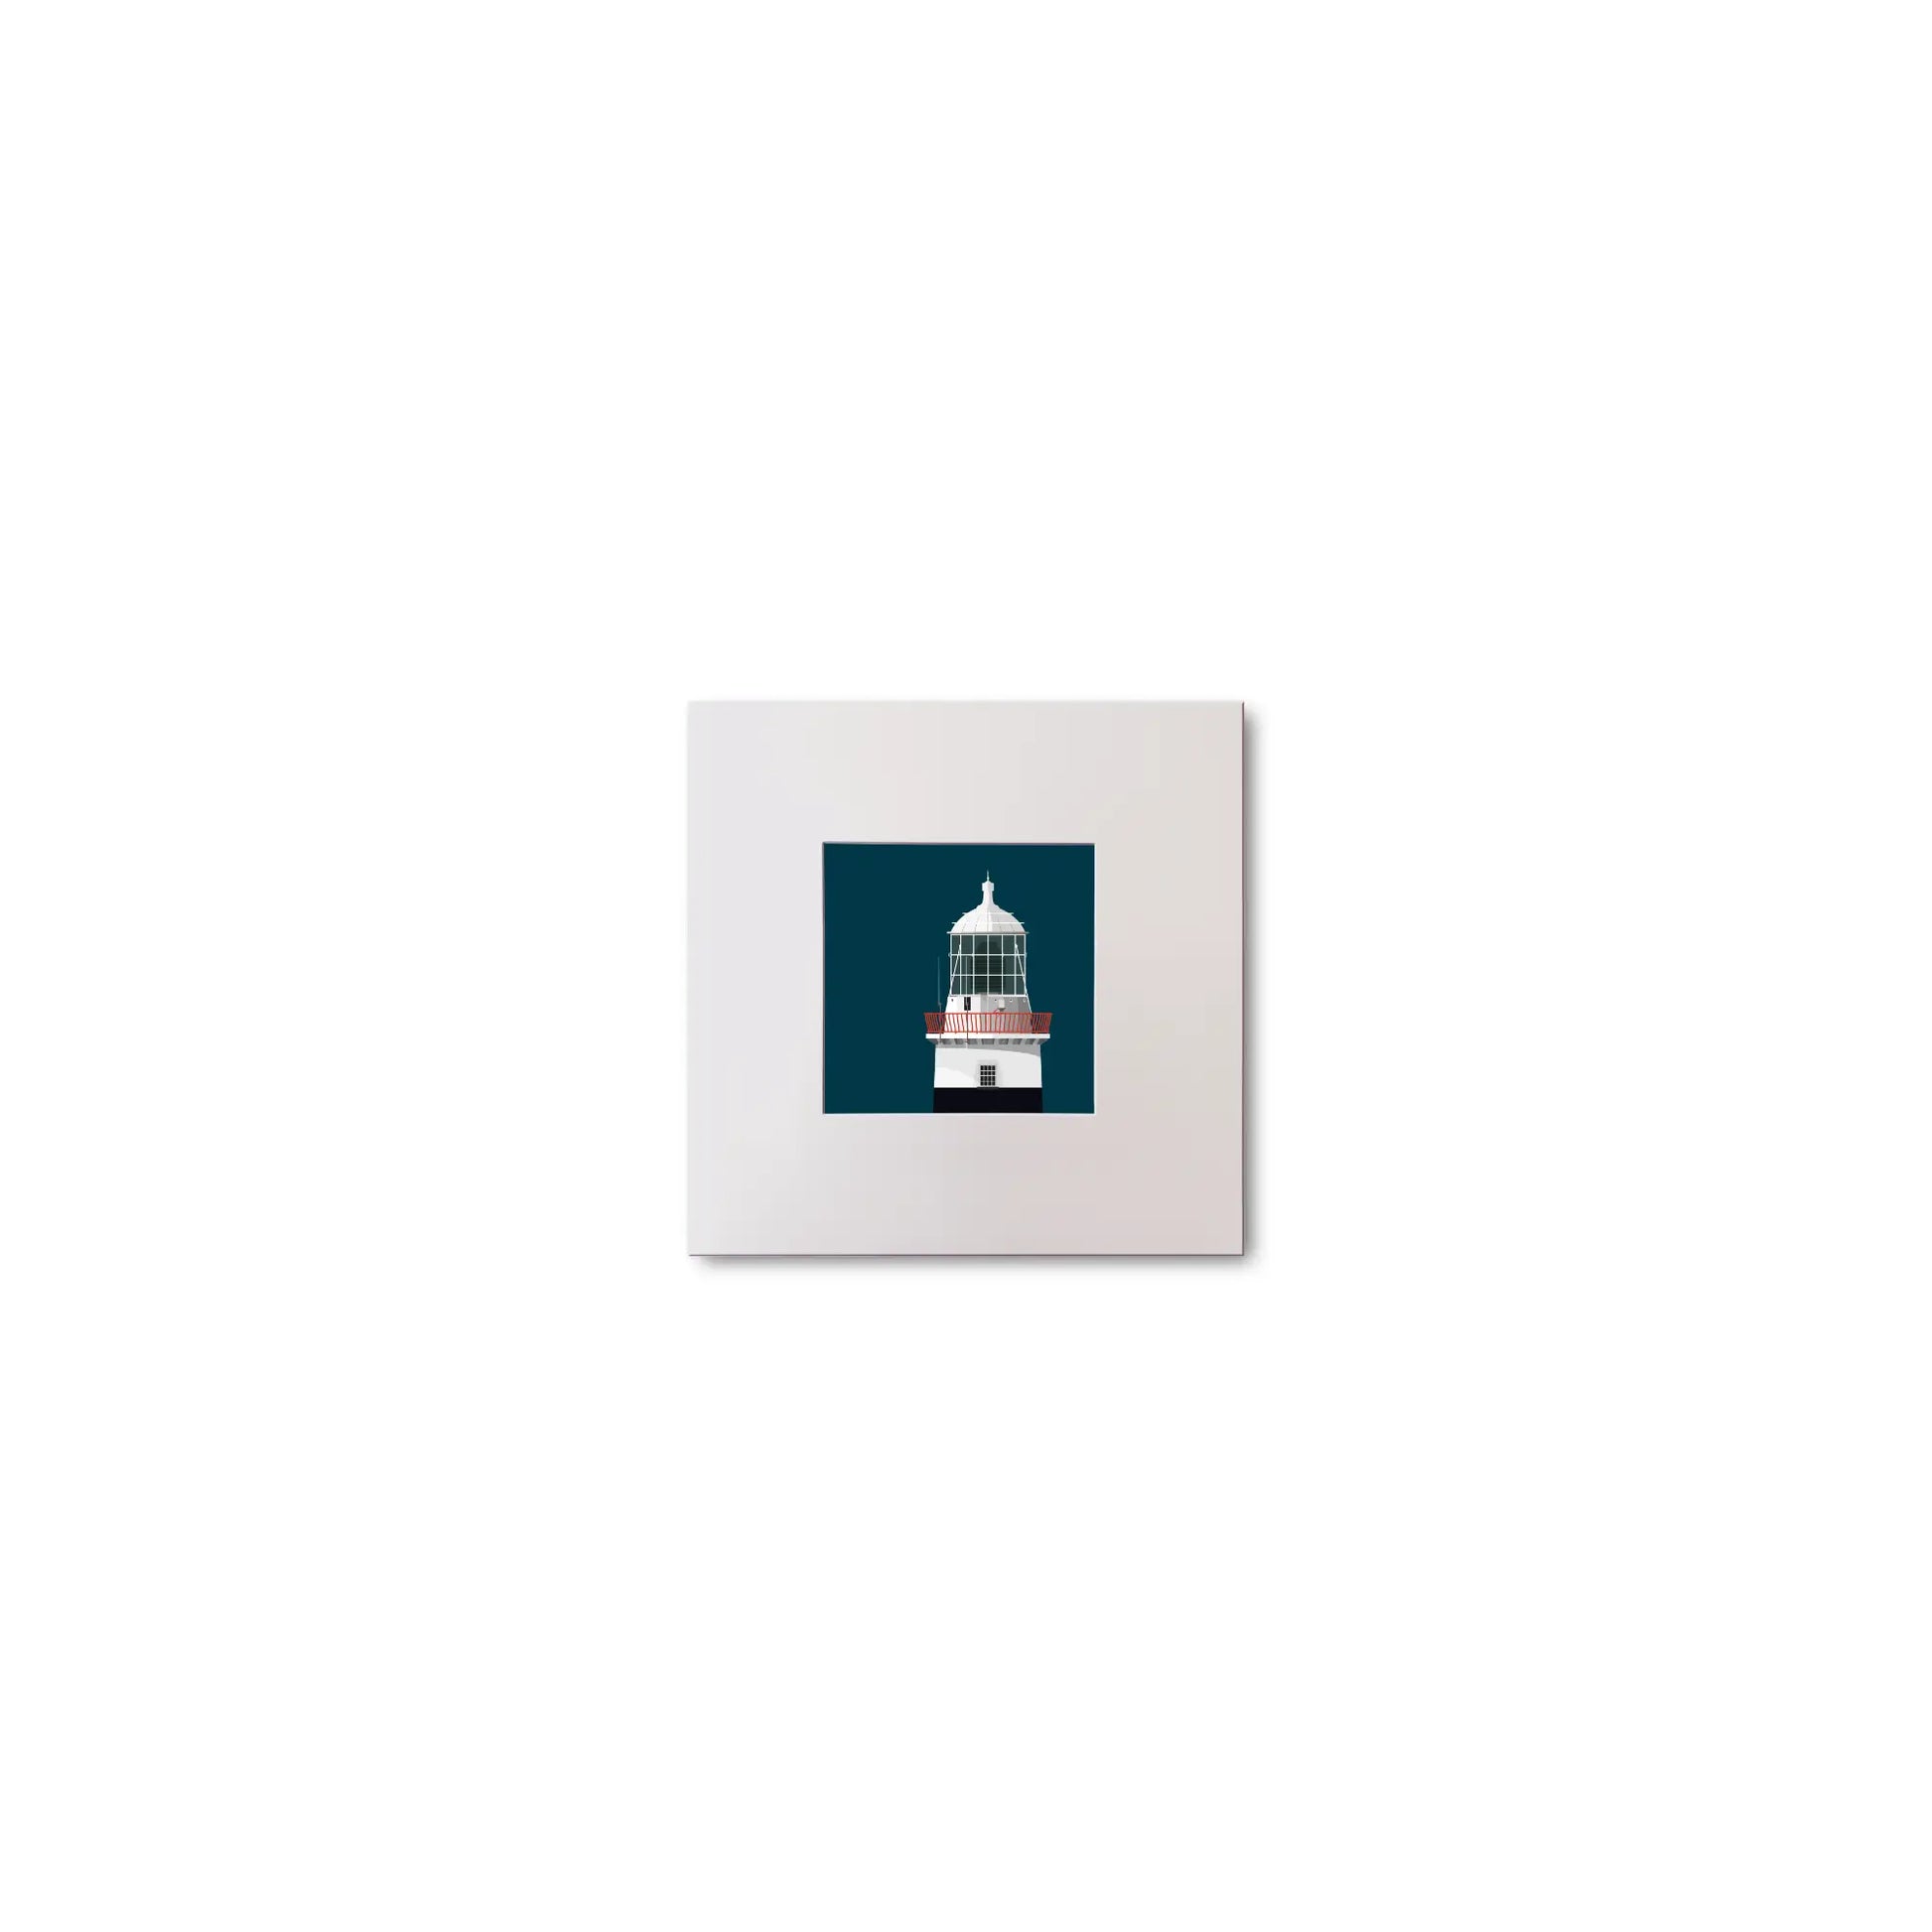 Illustration of Mine Head lighthouse on a midnight blue background, mounted and measuring 10x10cm.